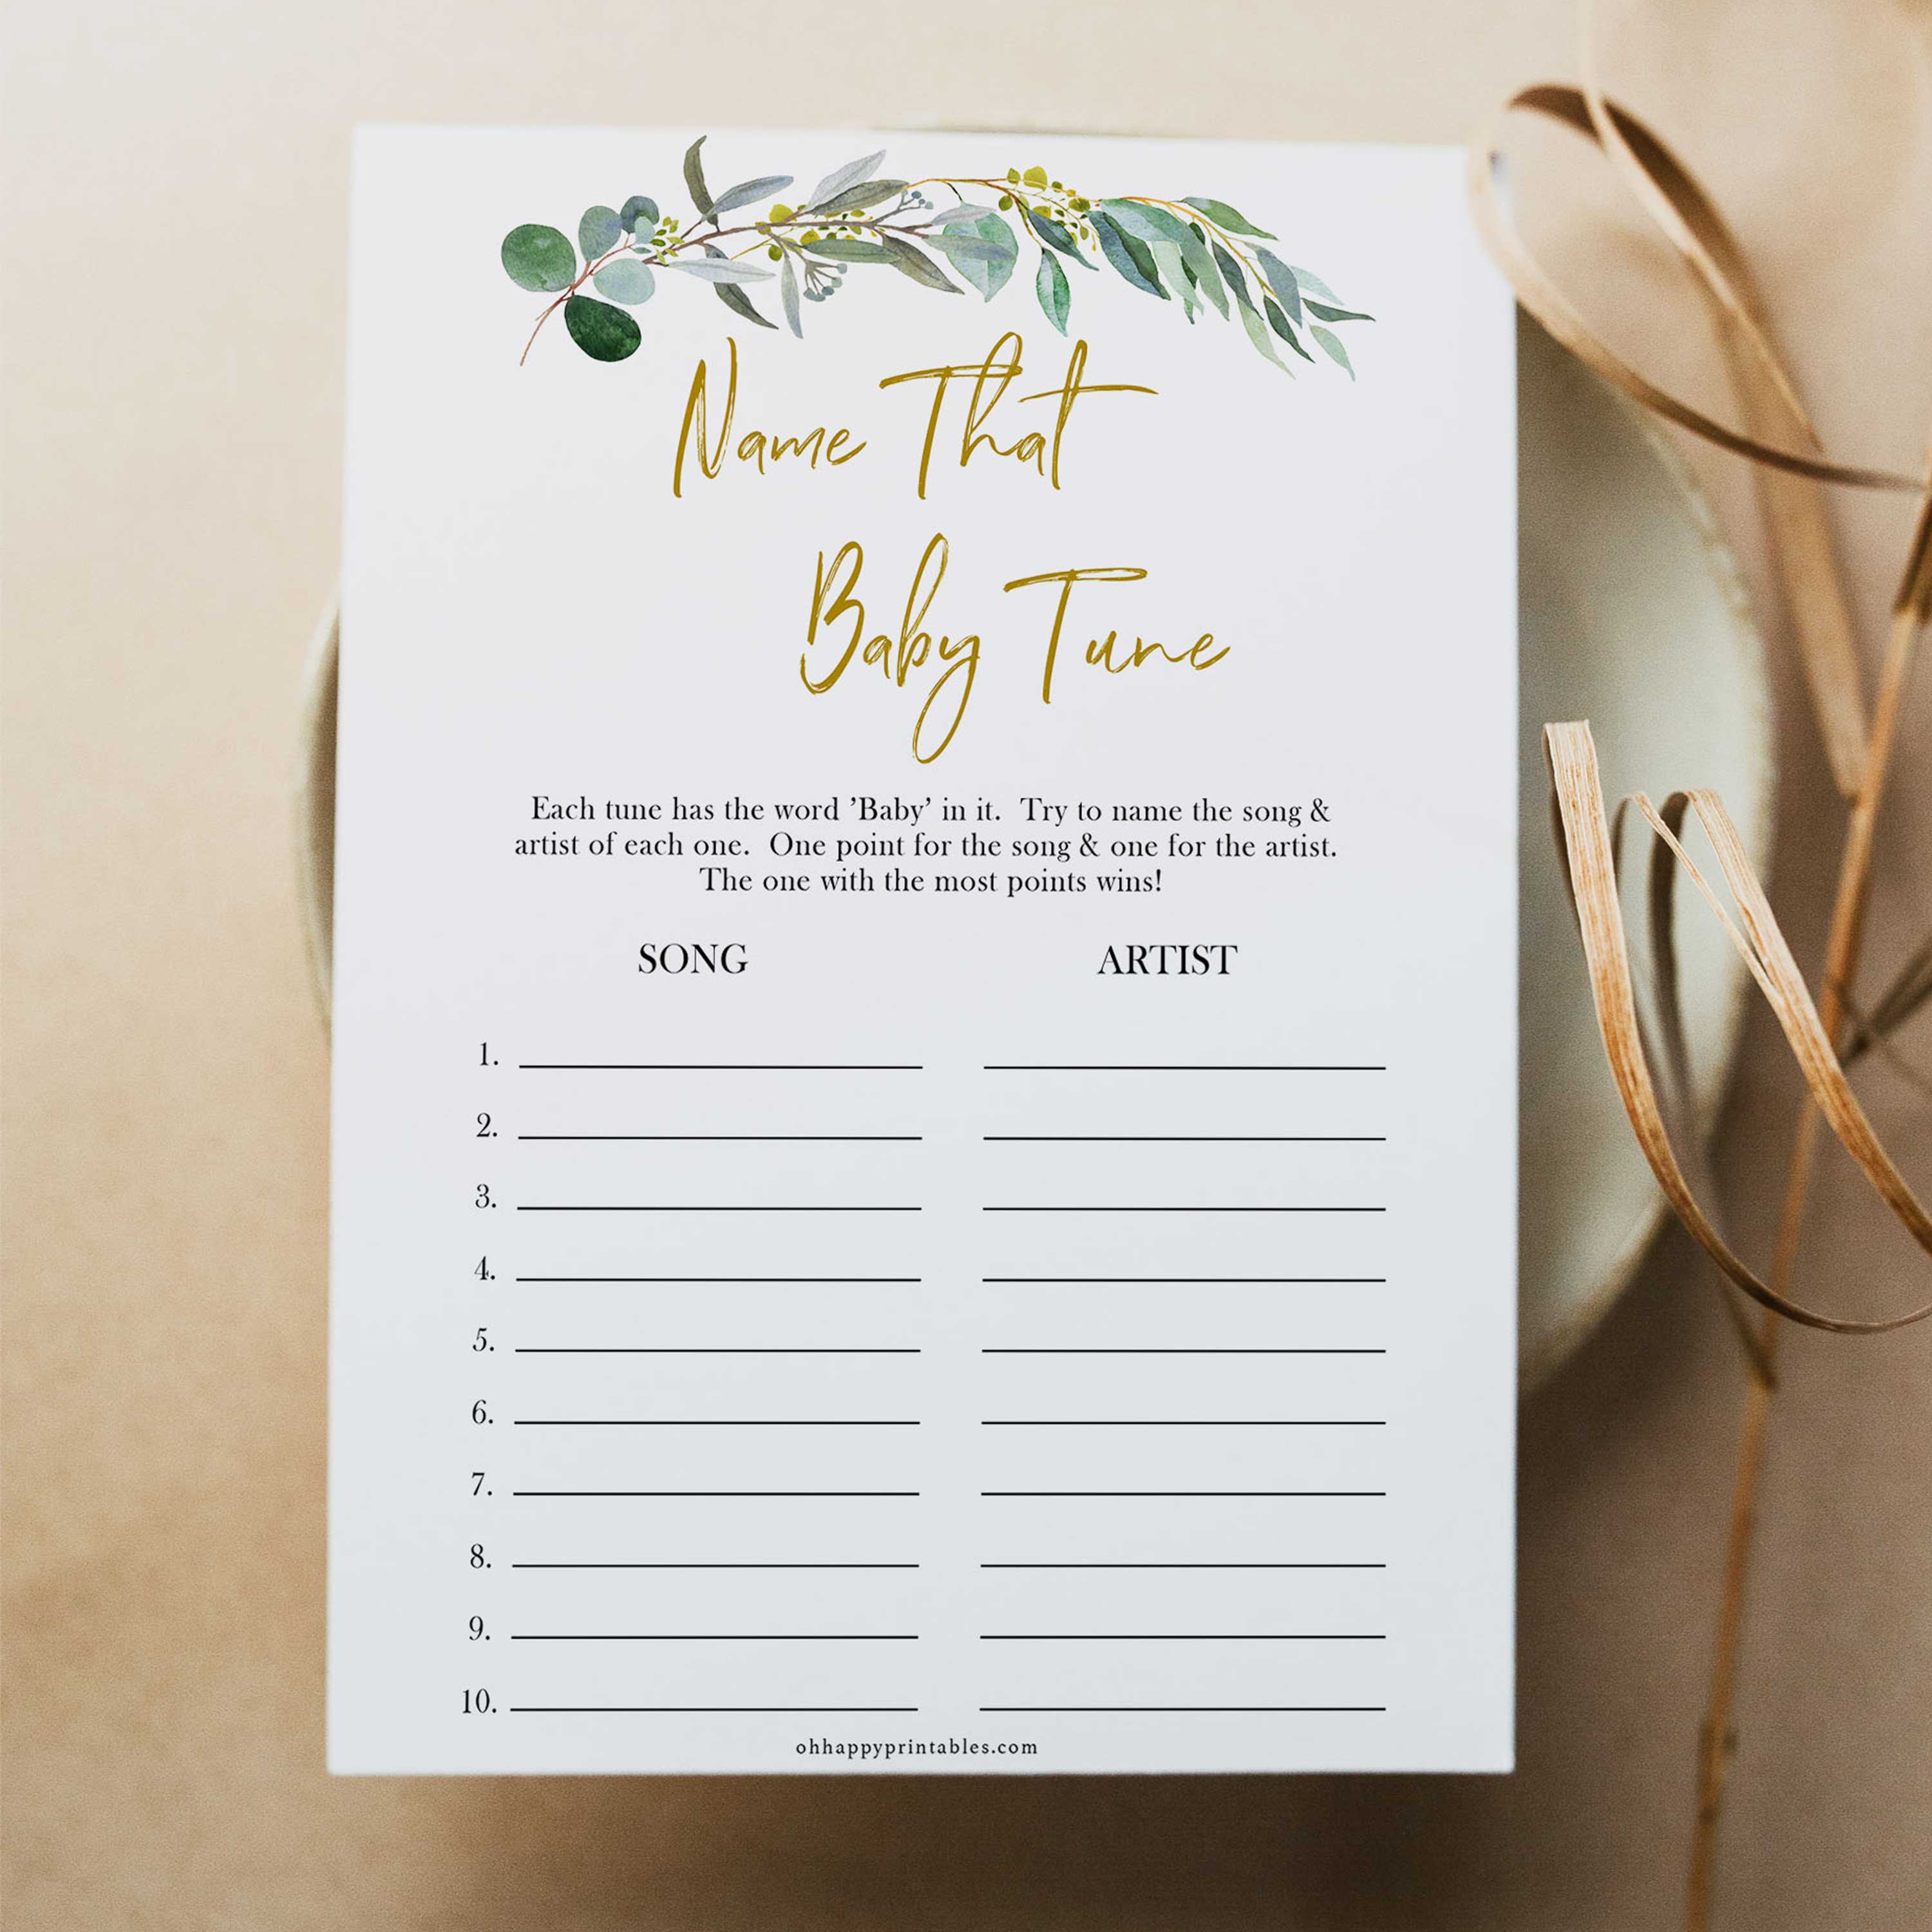 Eucalyptus baby shower games, name that baby tune baby game, fun baby shower games, printable baby games, baby shower ideas, baby games, baby shower baby shower bundle, baby shower games packs, botanical baby shower